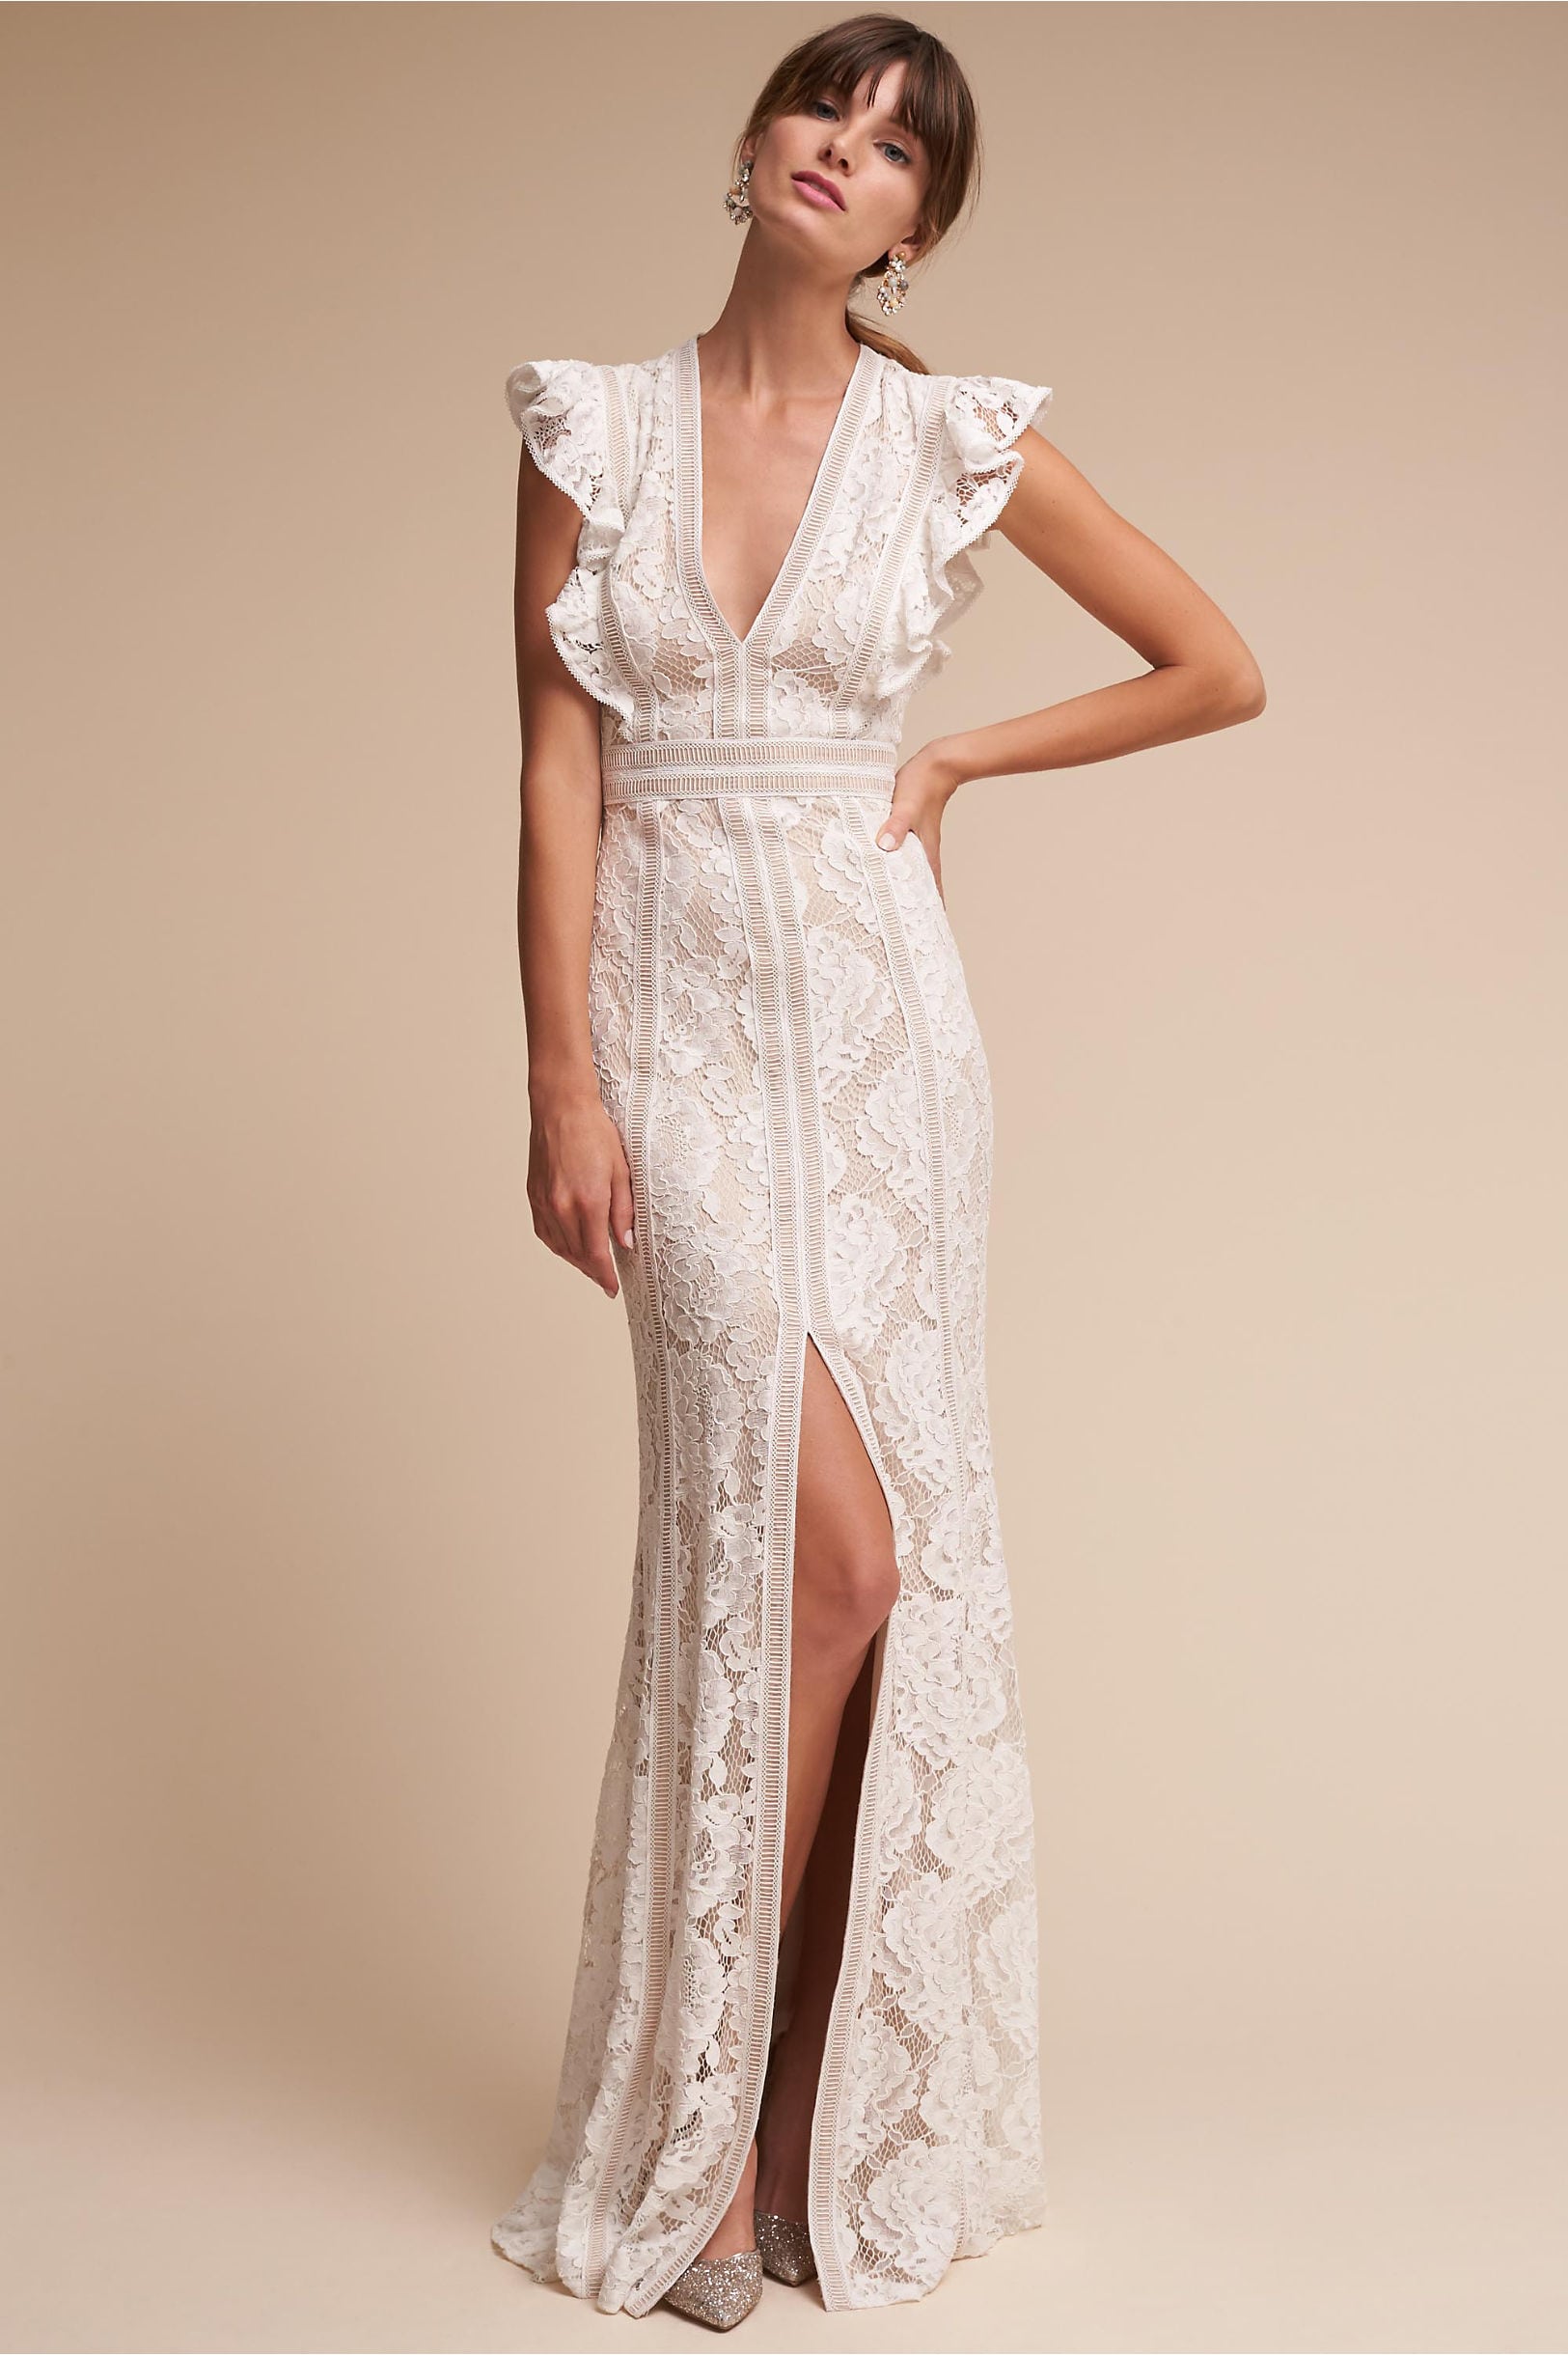 Placid Gown from BHLDN: vertical lace gown with deep v and flutter sleeve